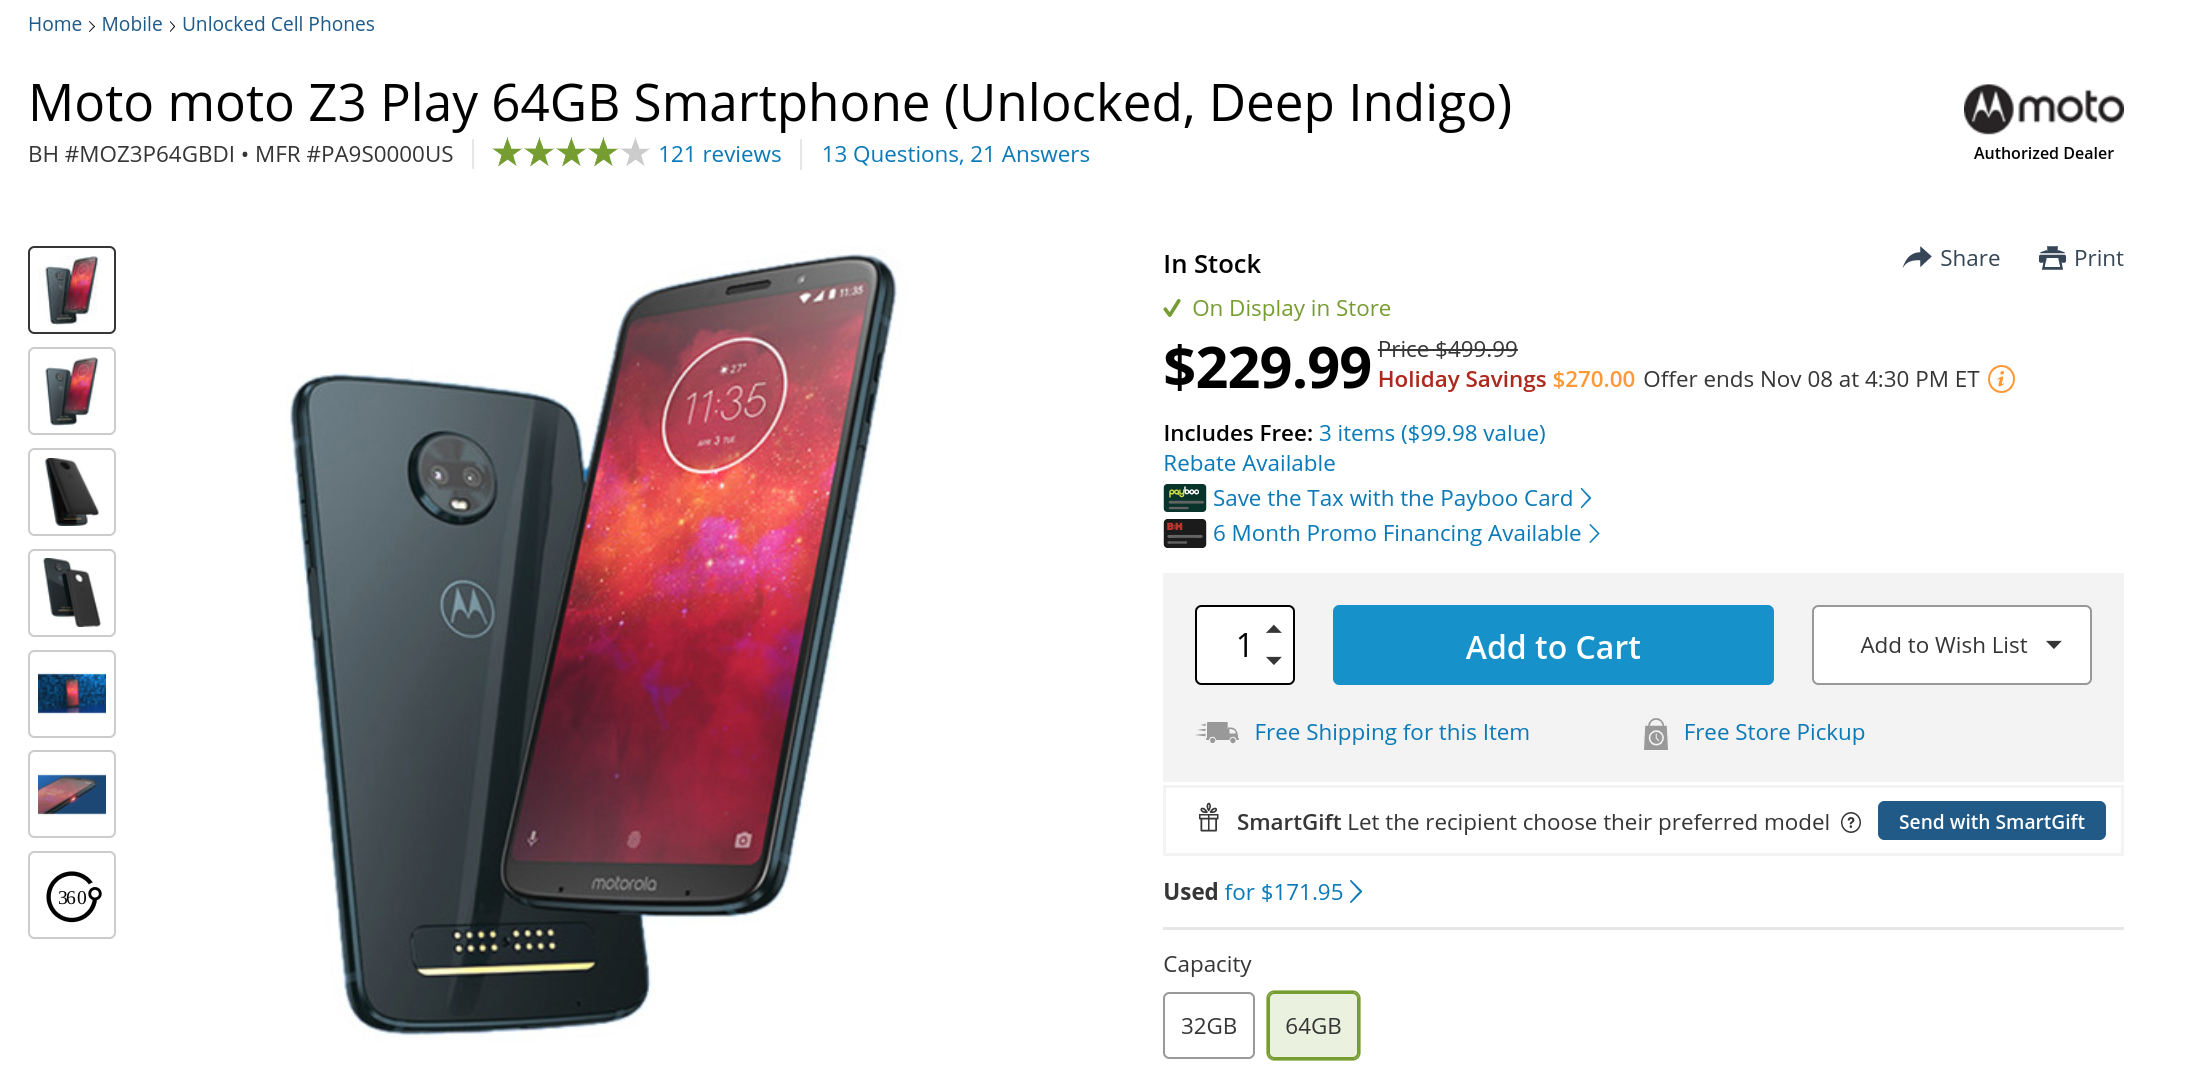 Score an unlocked Moto Z3 Play for record-low prices, no strings attached